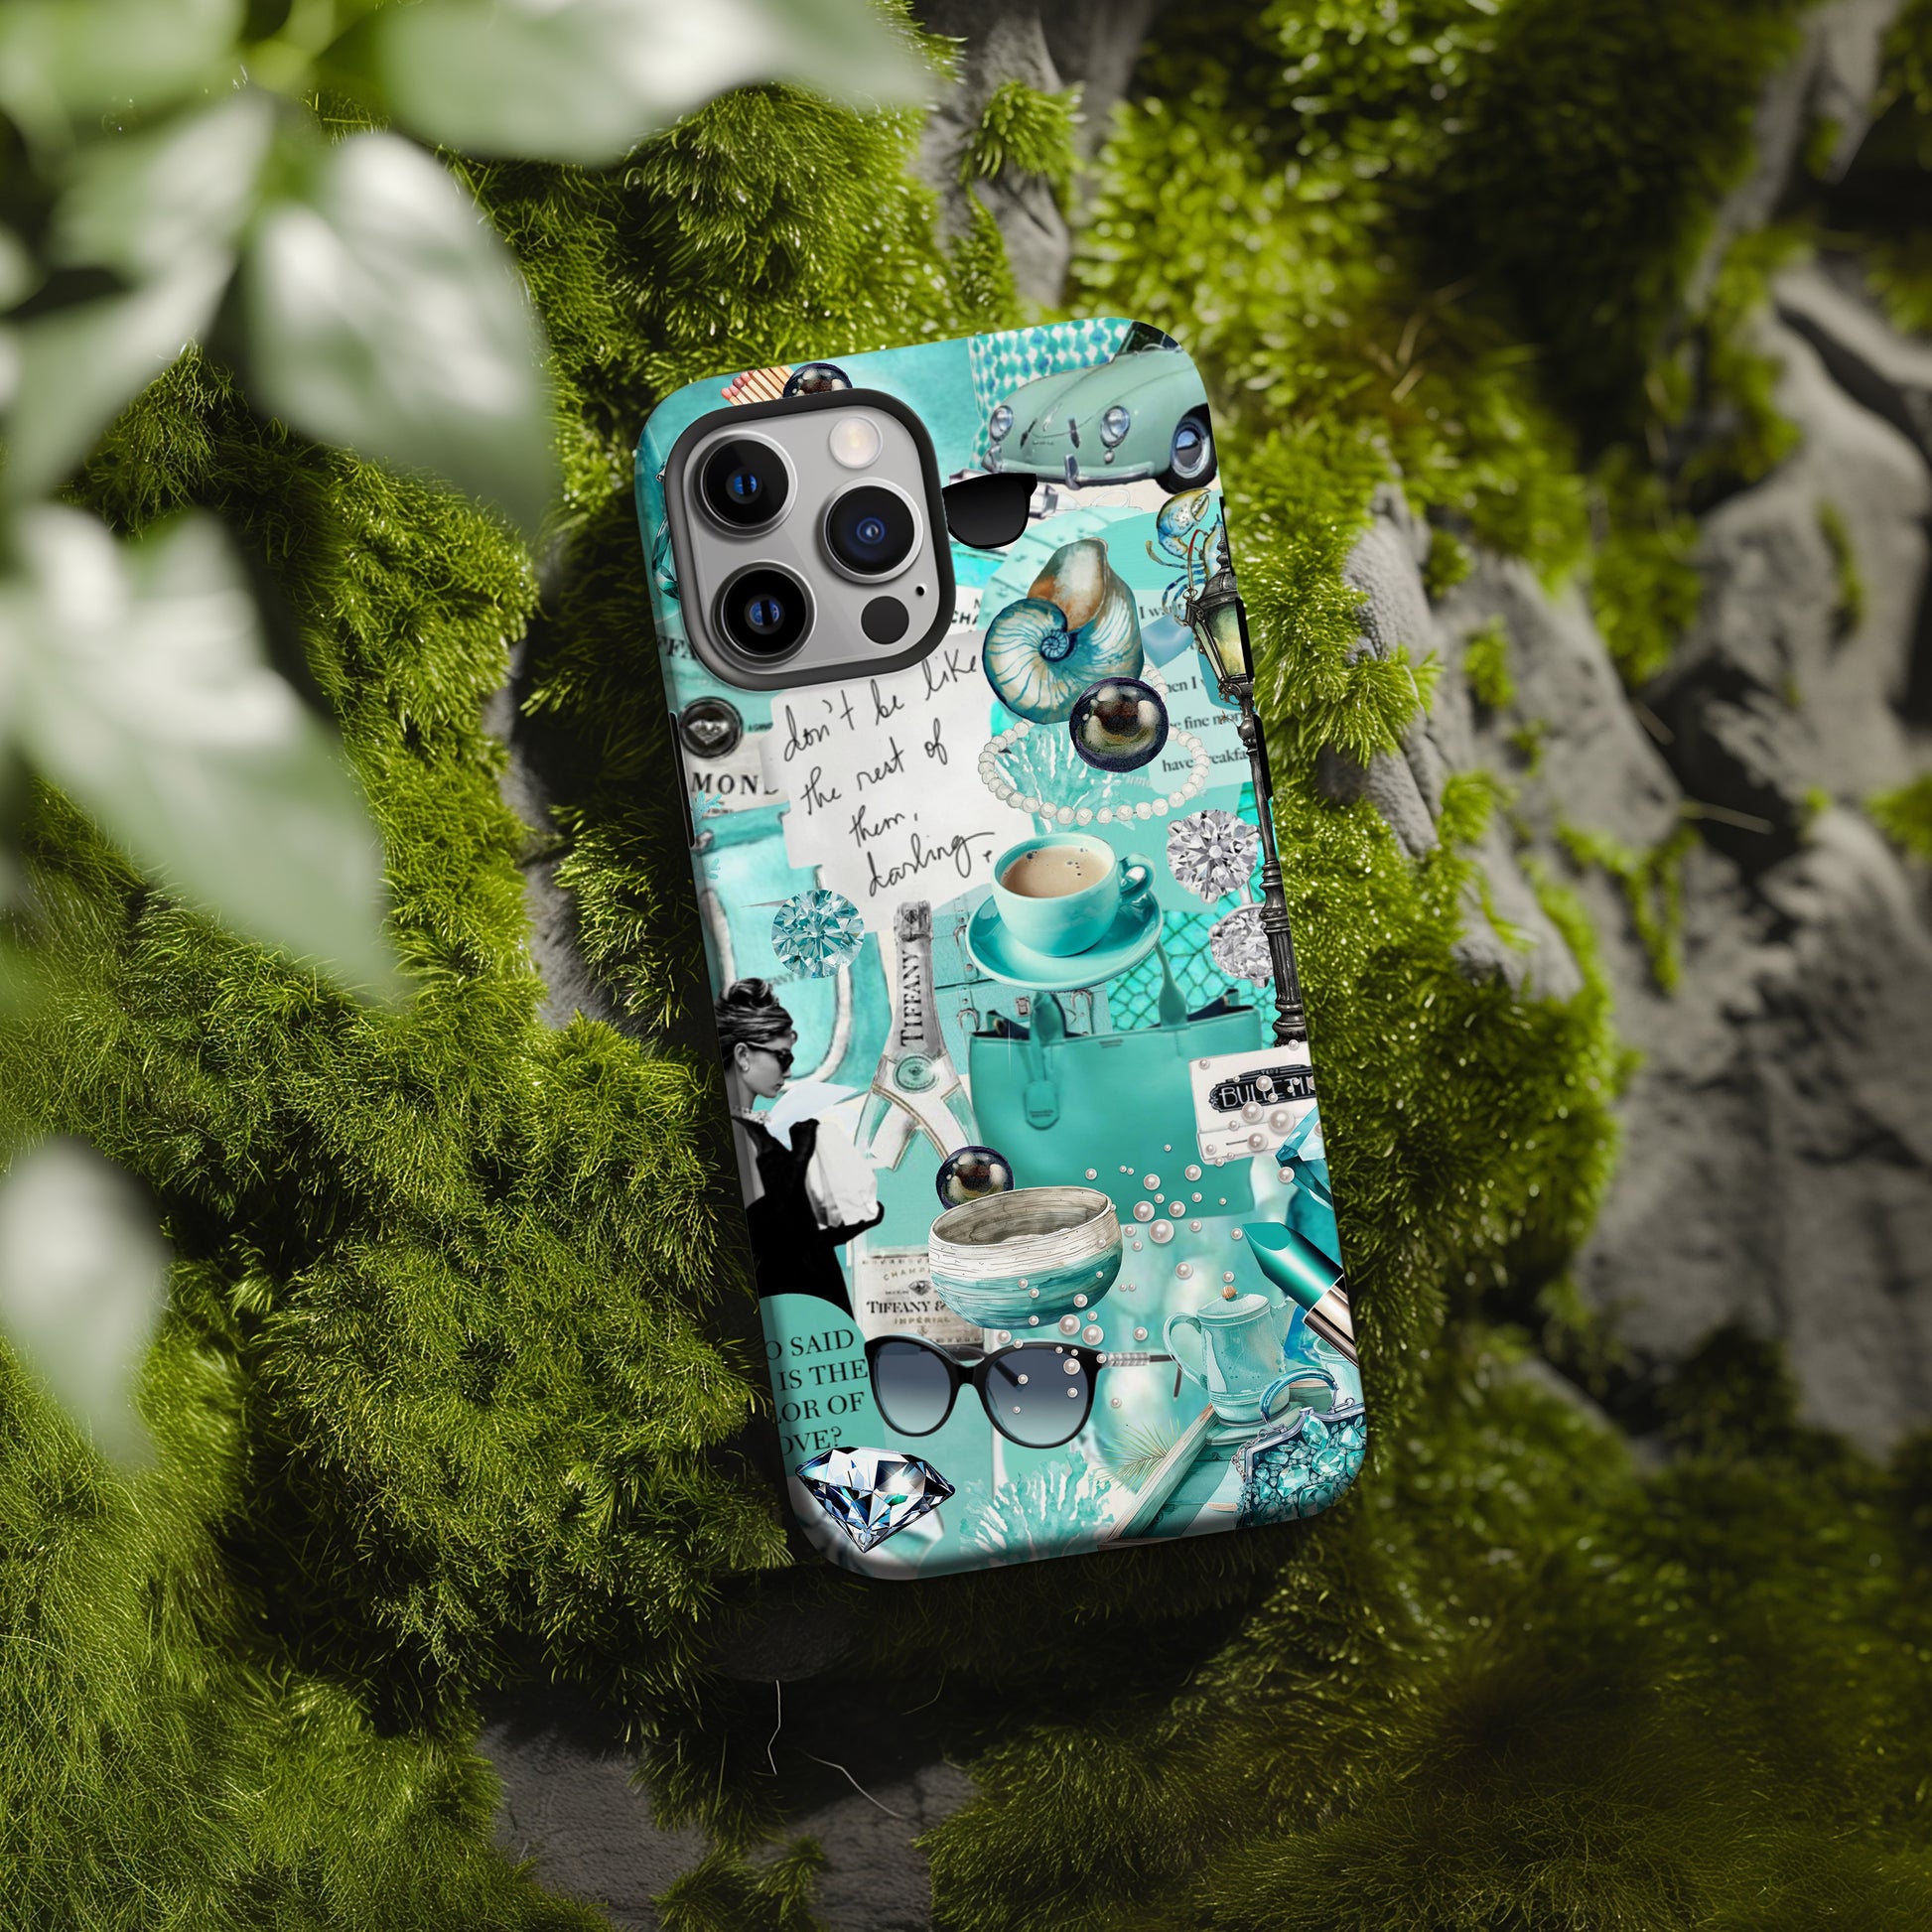 Moss rock with Tiffany Blue Collage Phone Case. Breakfast at Tiffany's iconic phone case by Artscape Market